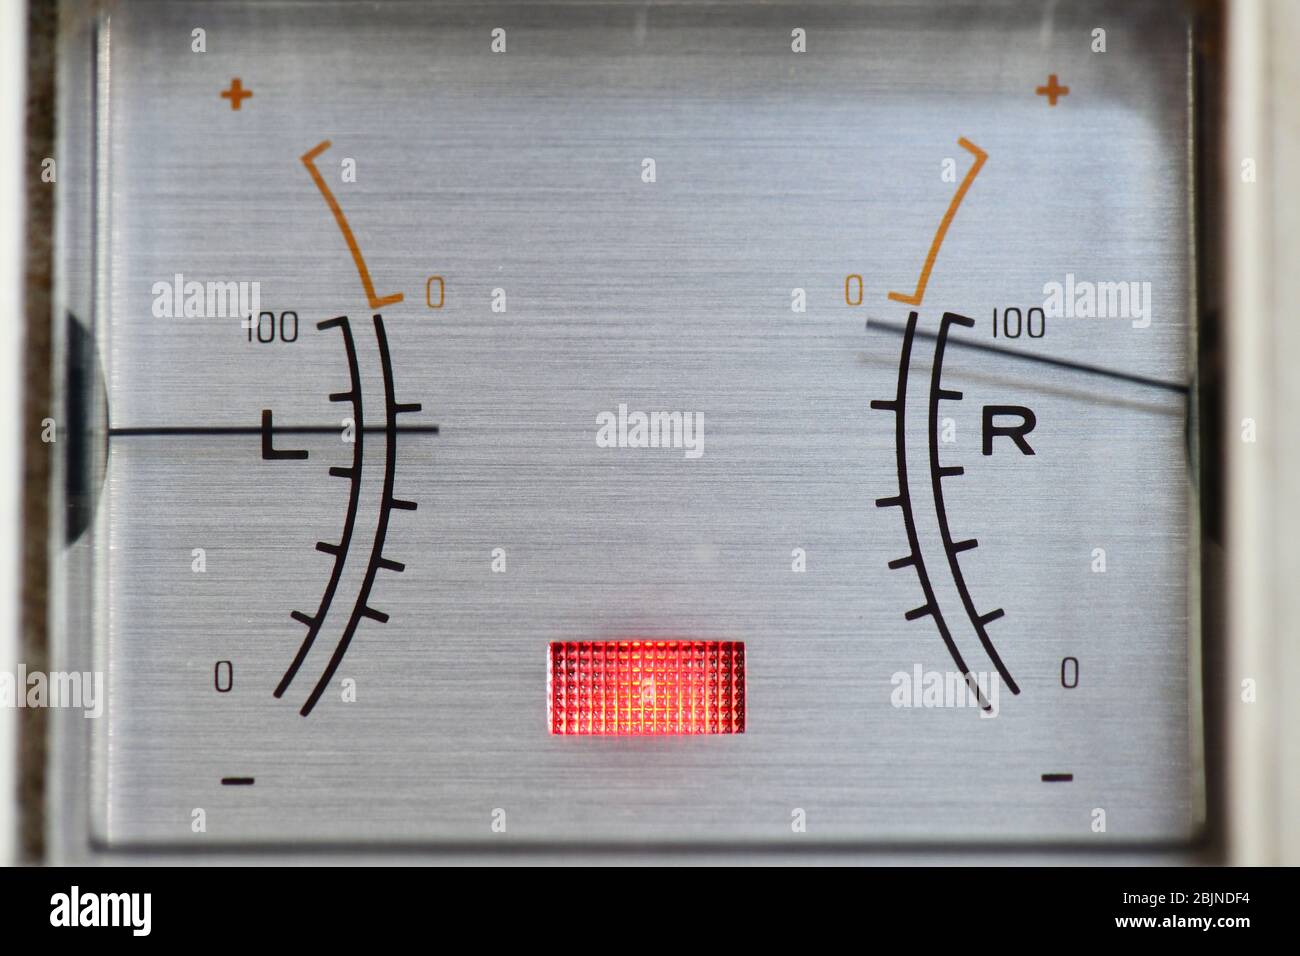 needles showing sound level in decibels on sound recording electronic equipment Stock Photo